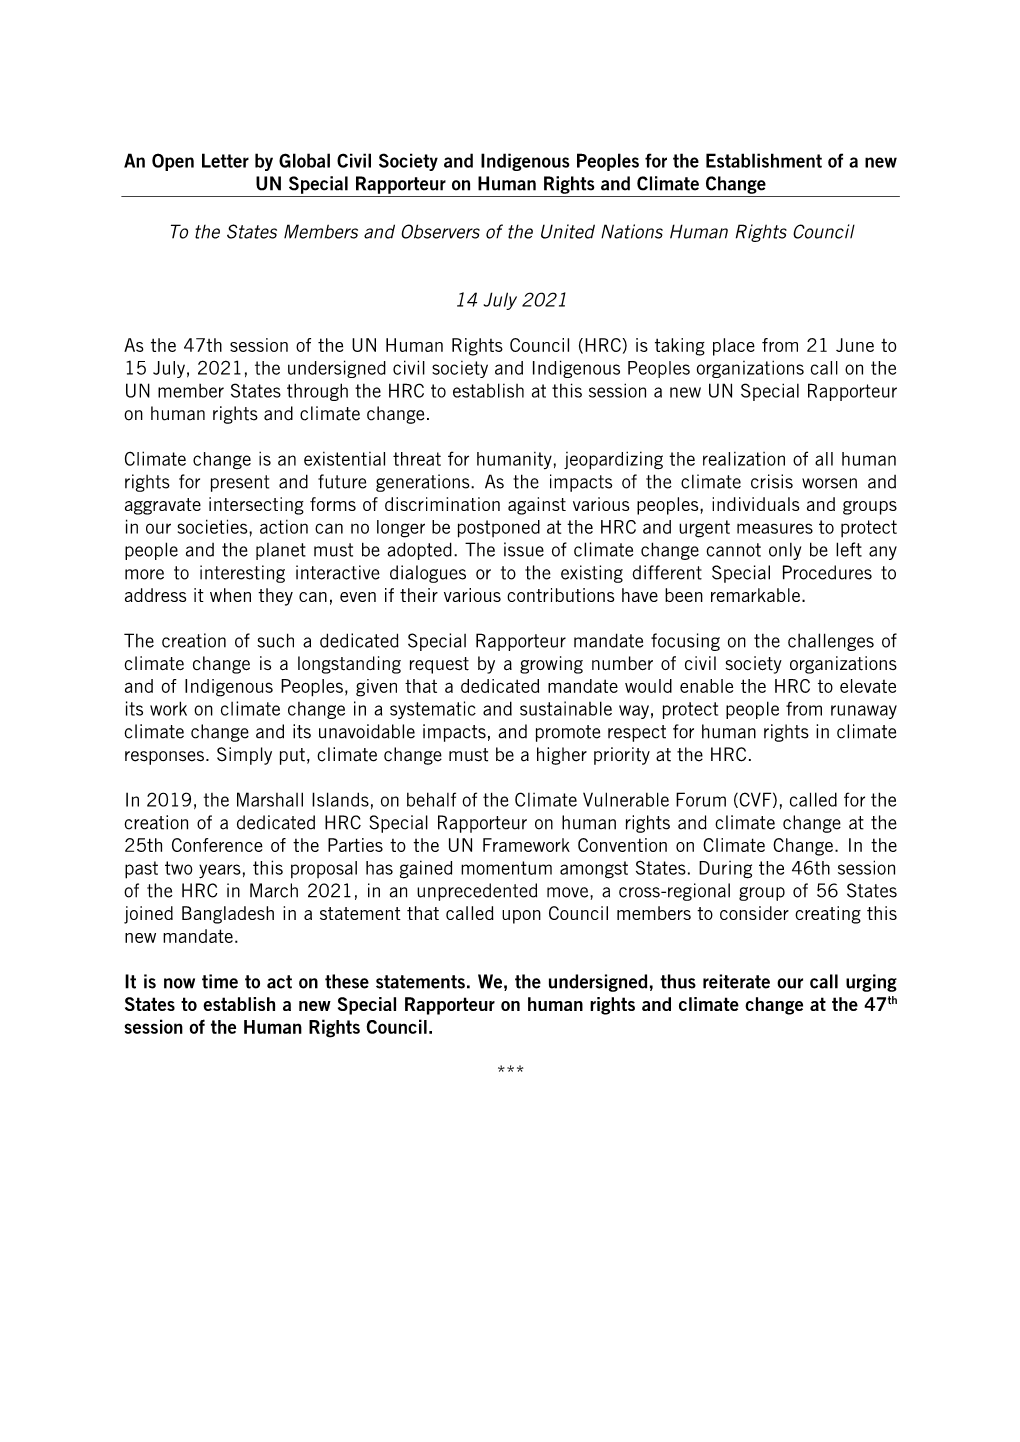 Open Letter by Global Civil Society and Indigenous Peoples for the Establishment of a New UN Special Rapporteur on Human Rights and Climate Change